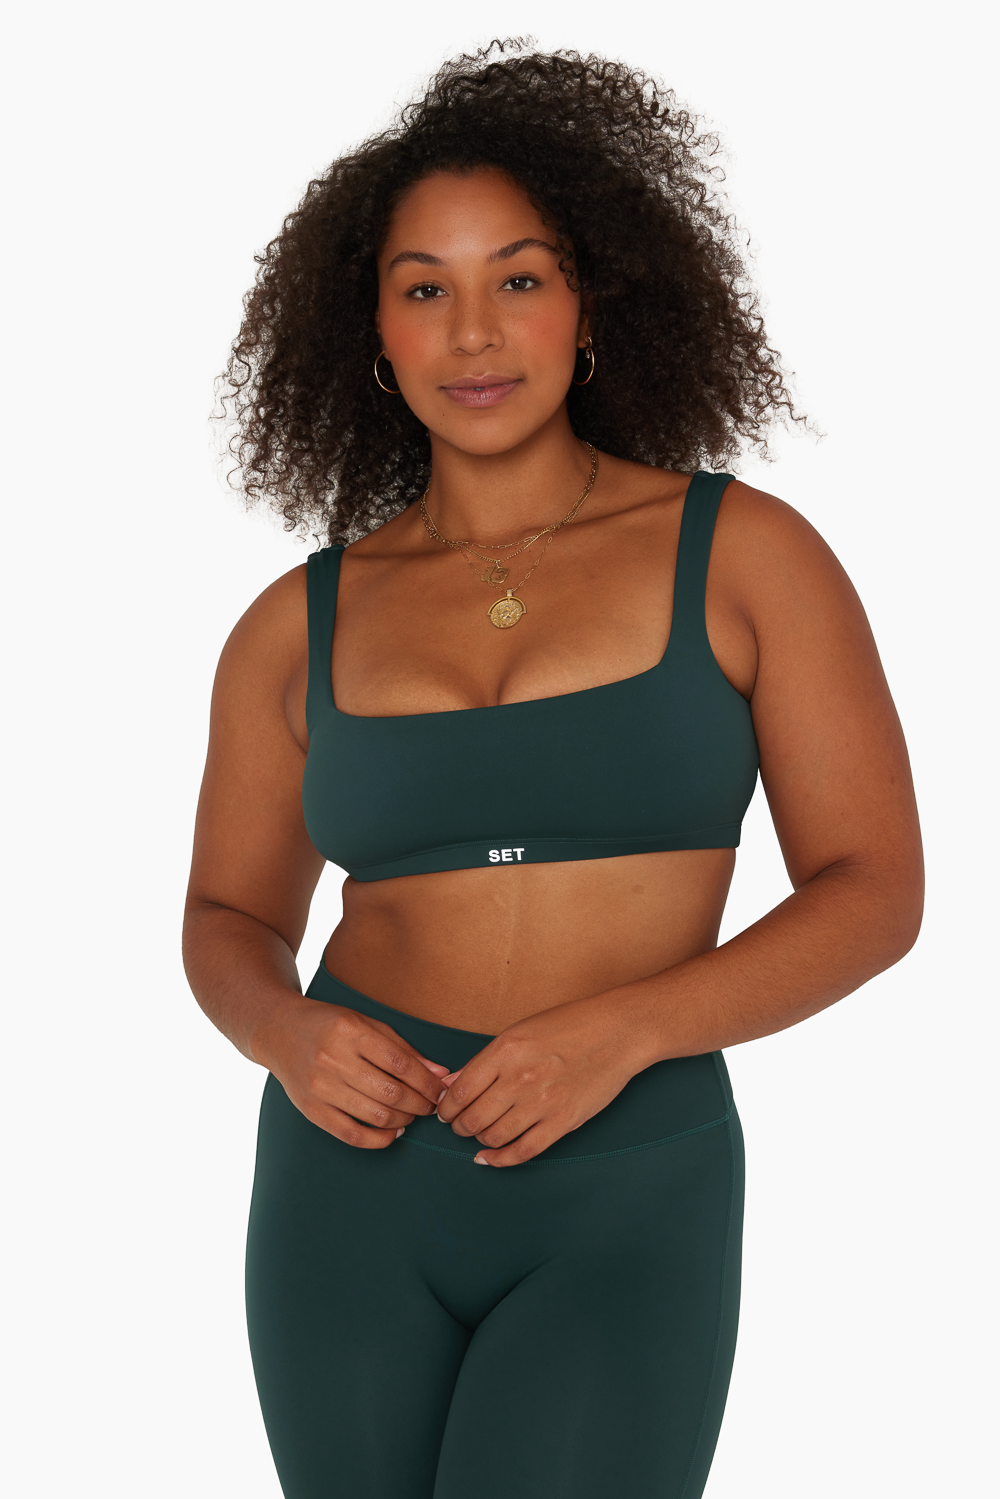 SPORTBODY® SQUARE BACK BRA - IVY Featured Image